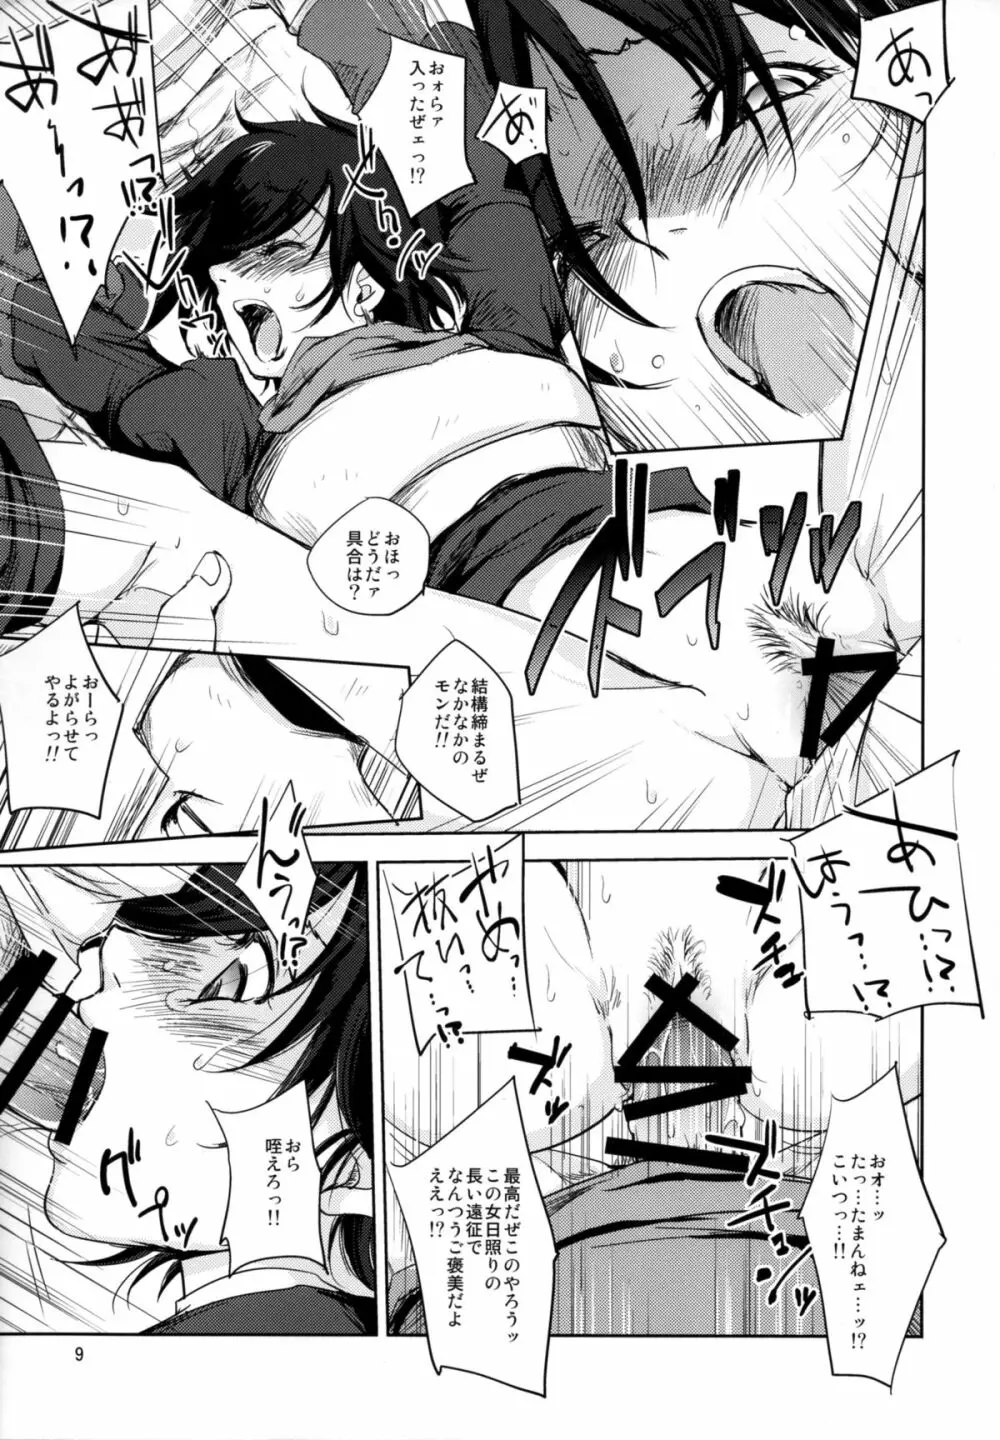 GRASSEN'S WAR ANOTHER STORY Ex #05 ノード侵攻 V Page.9